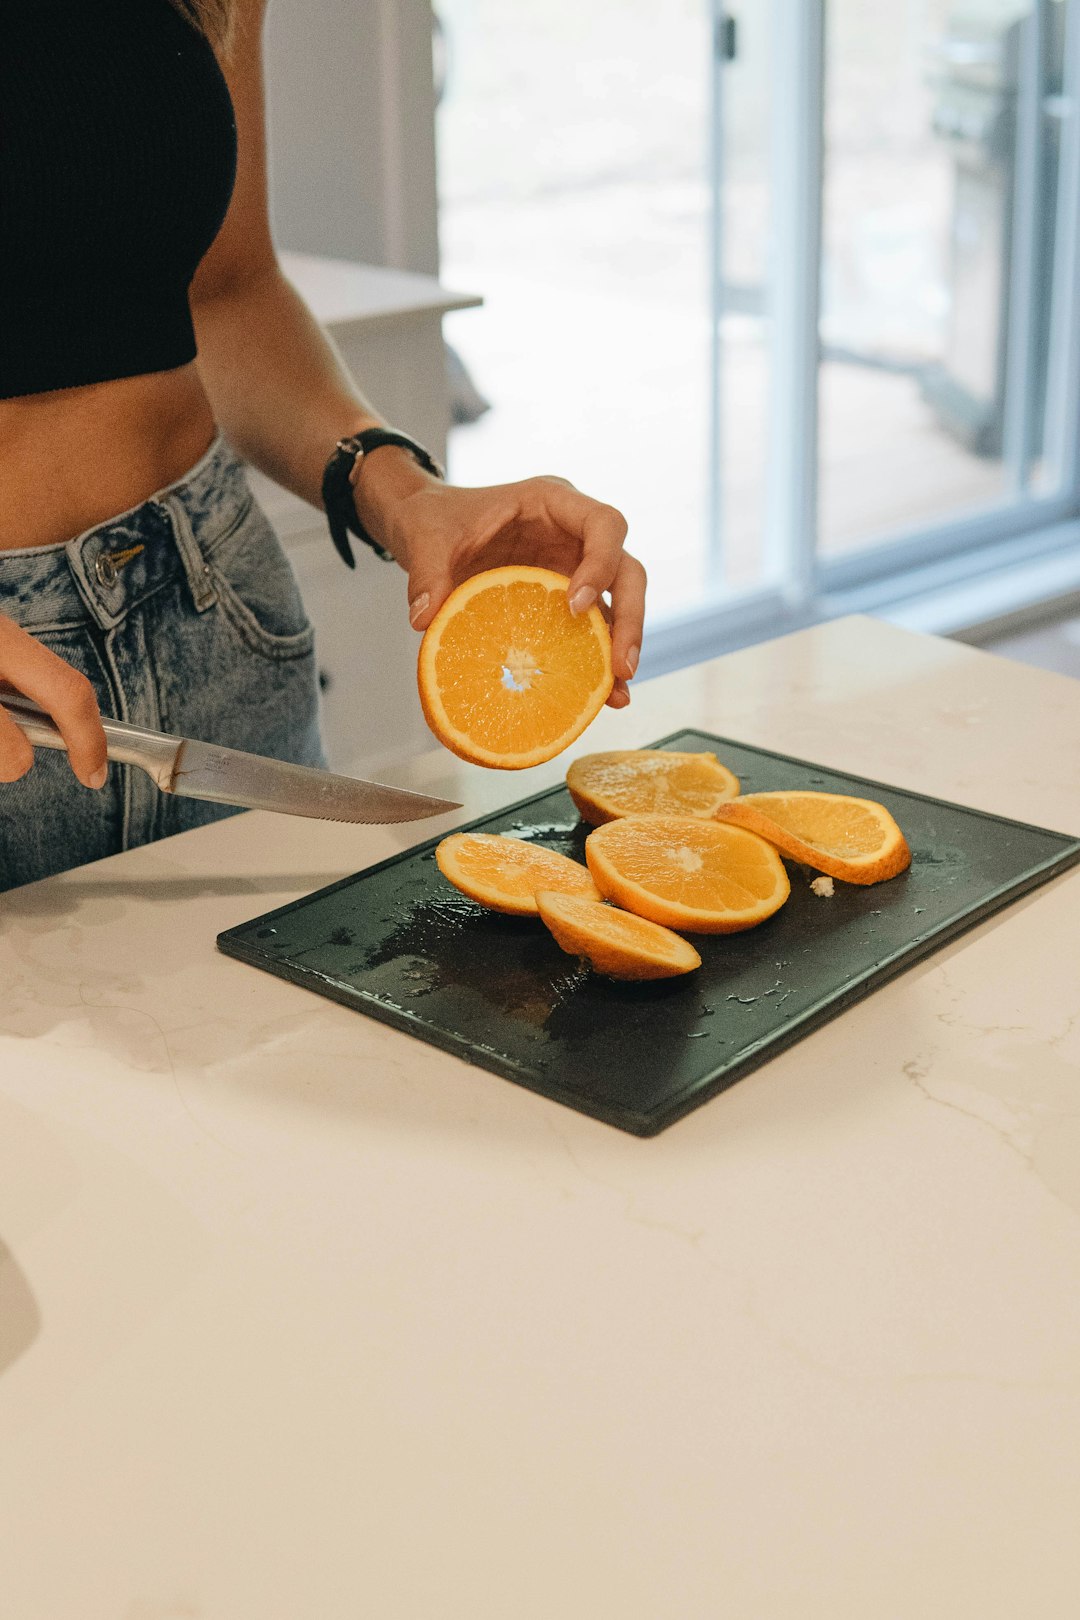 person slicing orange fruit on chopping board